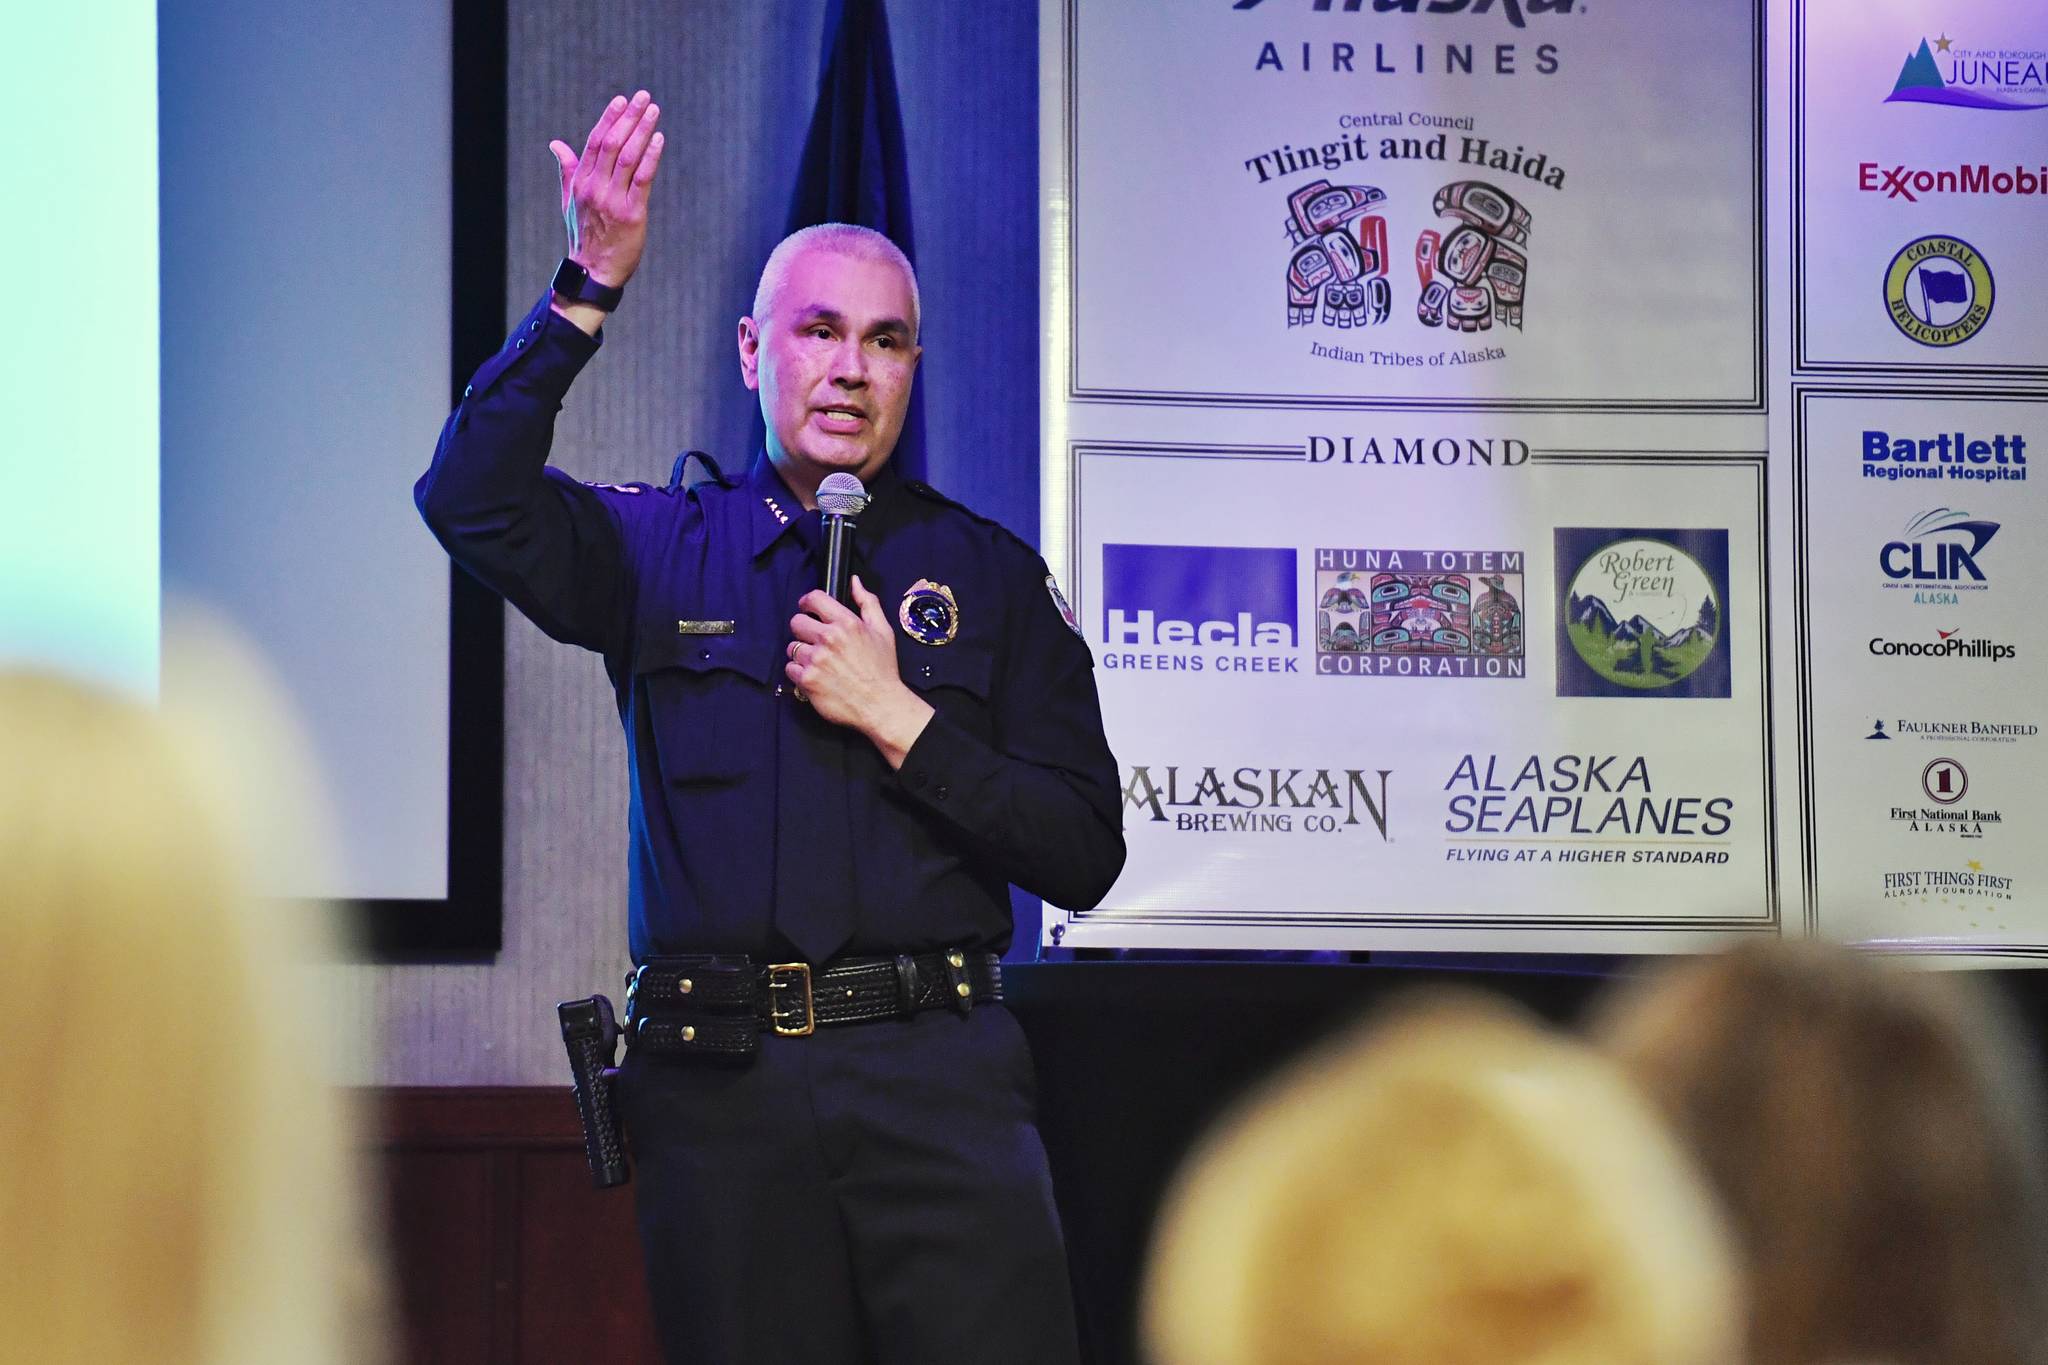 Juneau Police Chief Ed Mercer speaks to the Juneau Chamber of Commerce during its weekly luncheon at the Hangar Ballroom on Thursday, April 11, 2019. (Michael Penn | Juneau Empire)